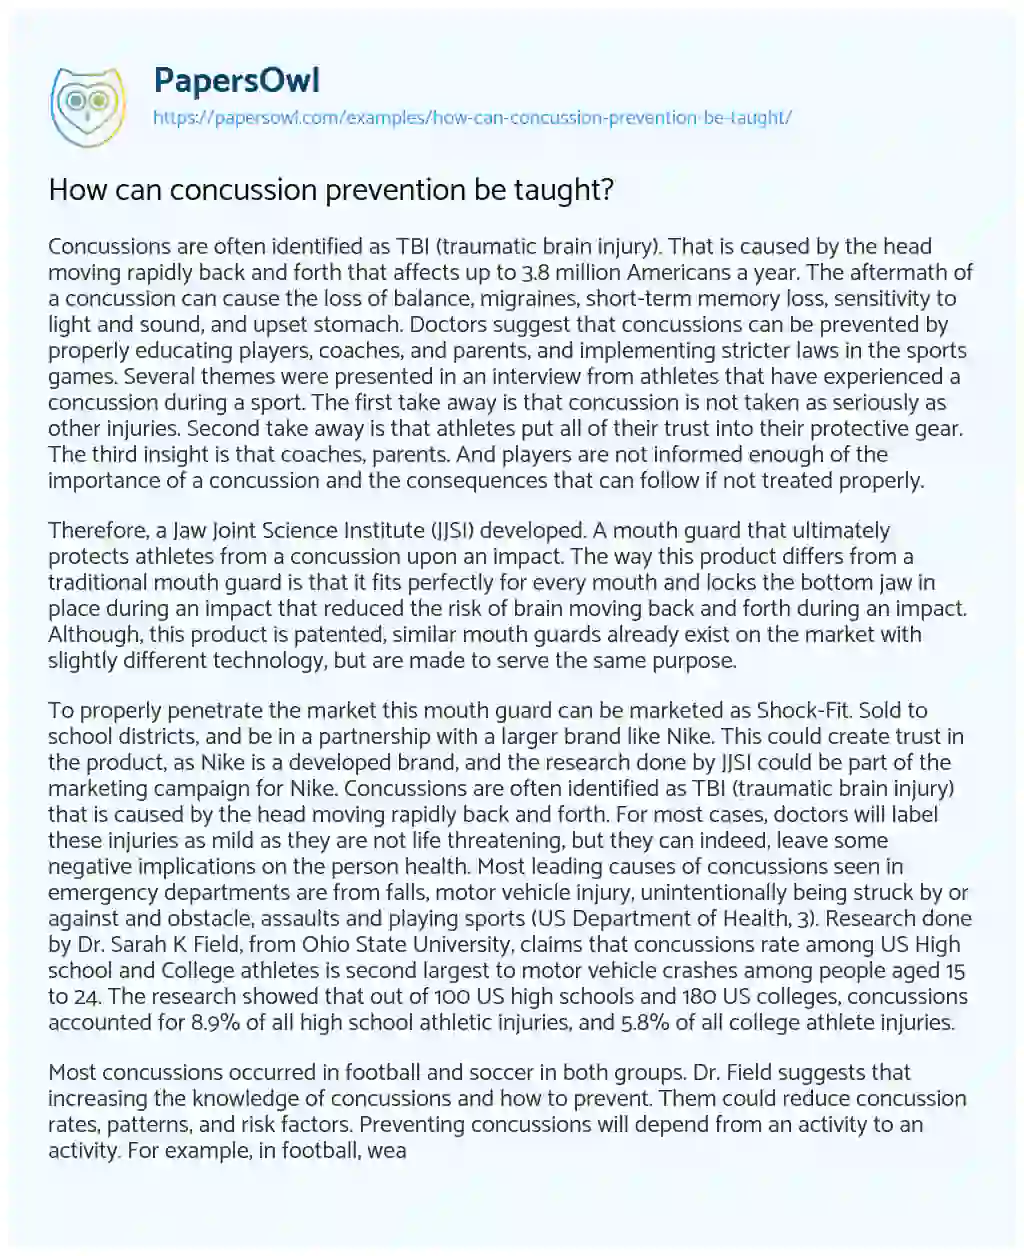 Essay on How Can Concussion Prevention be Taught?